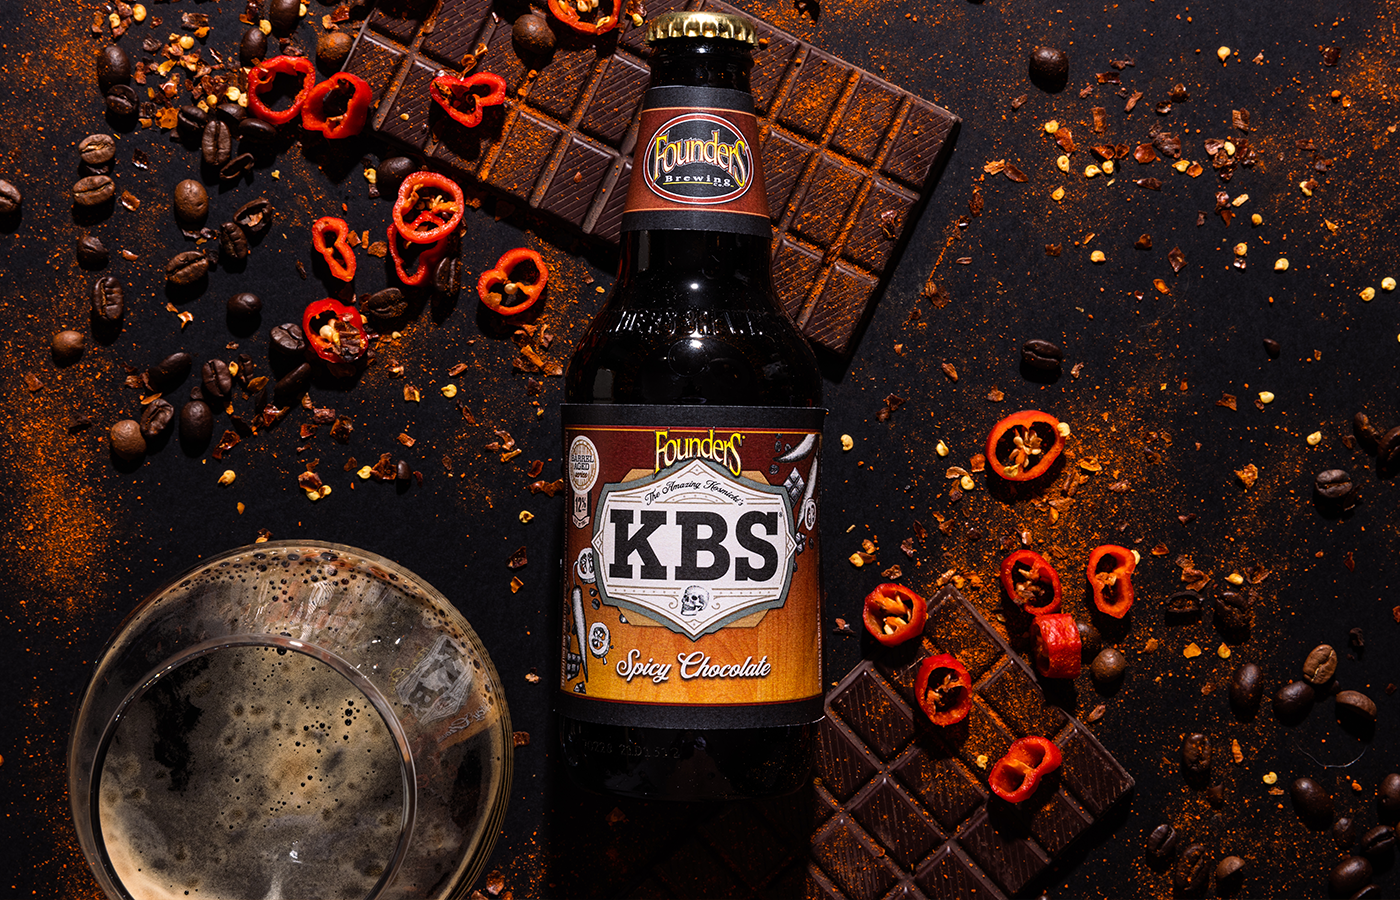 KBS Spicy Chocolate with flavor notes